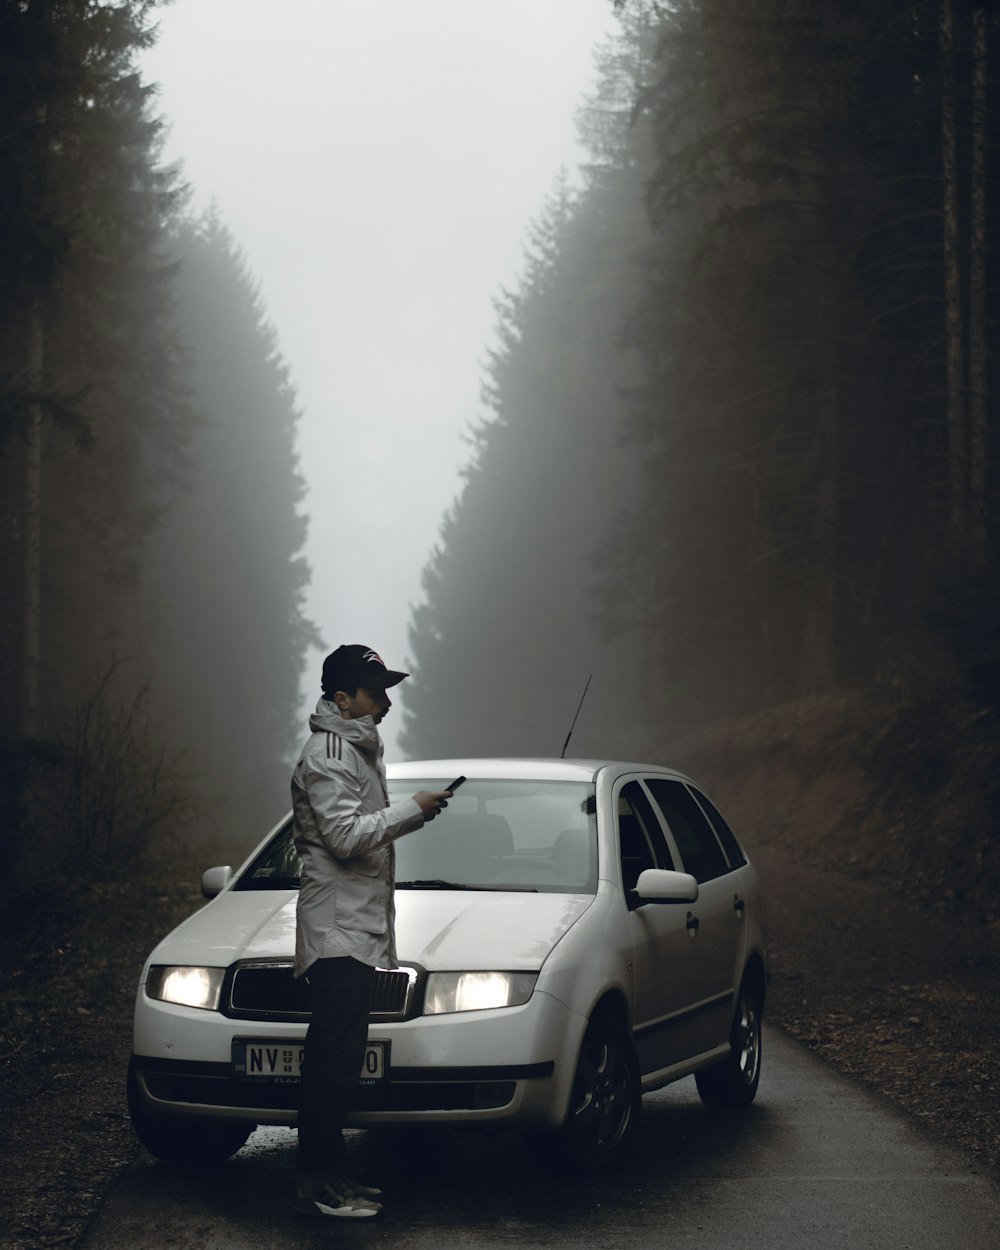 grayscale photography of man standing in front of Skoda hatchback